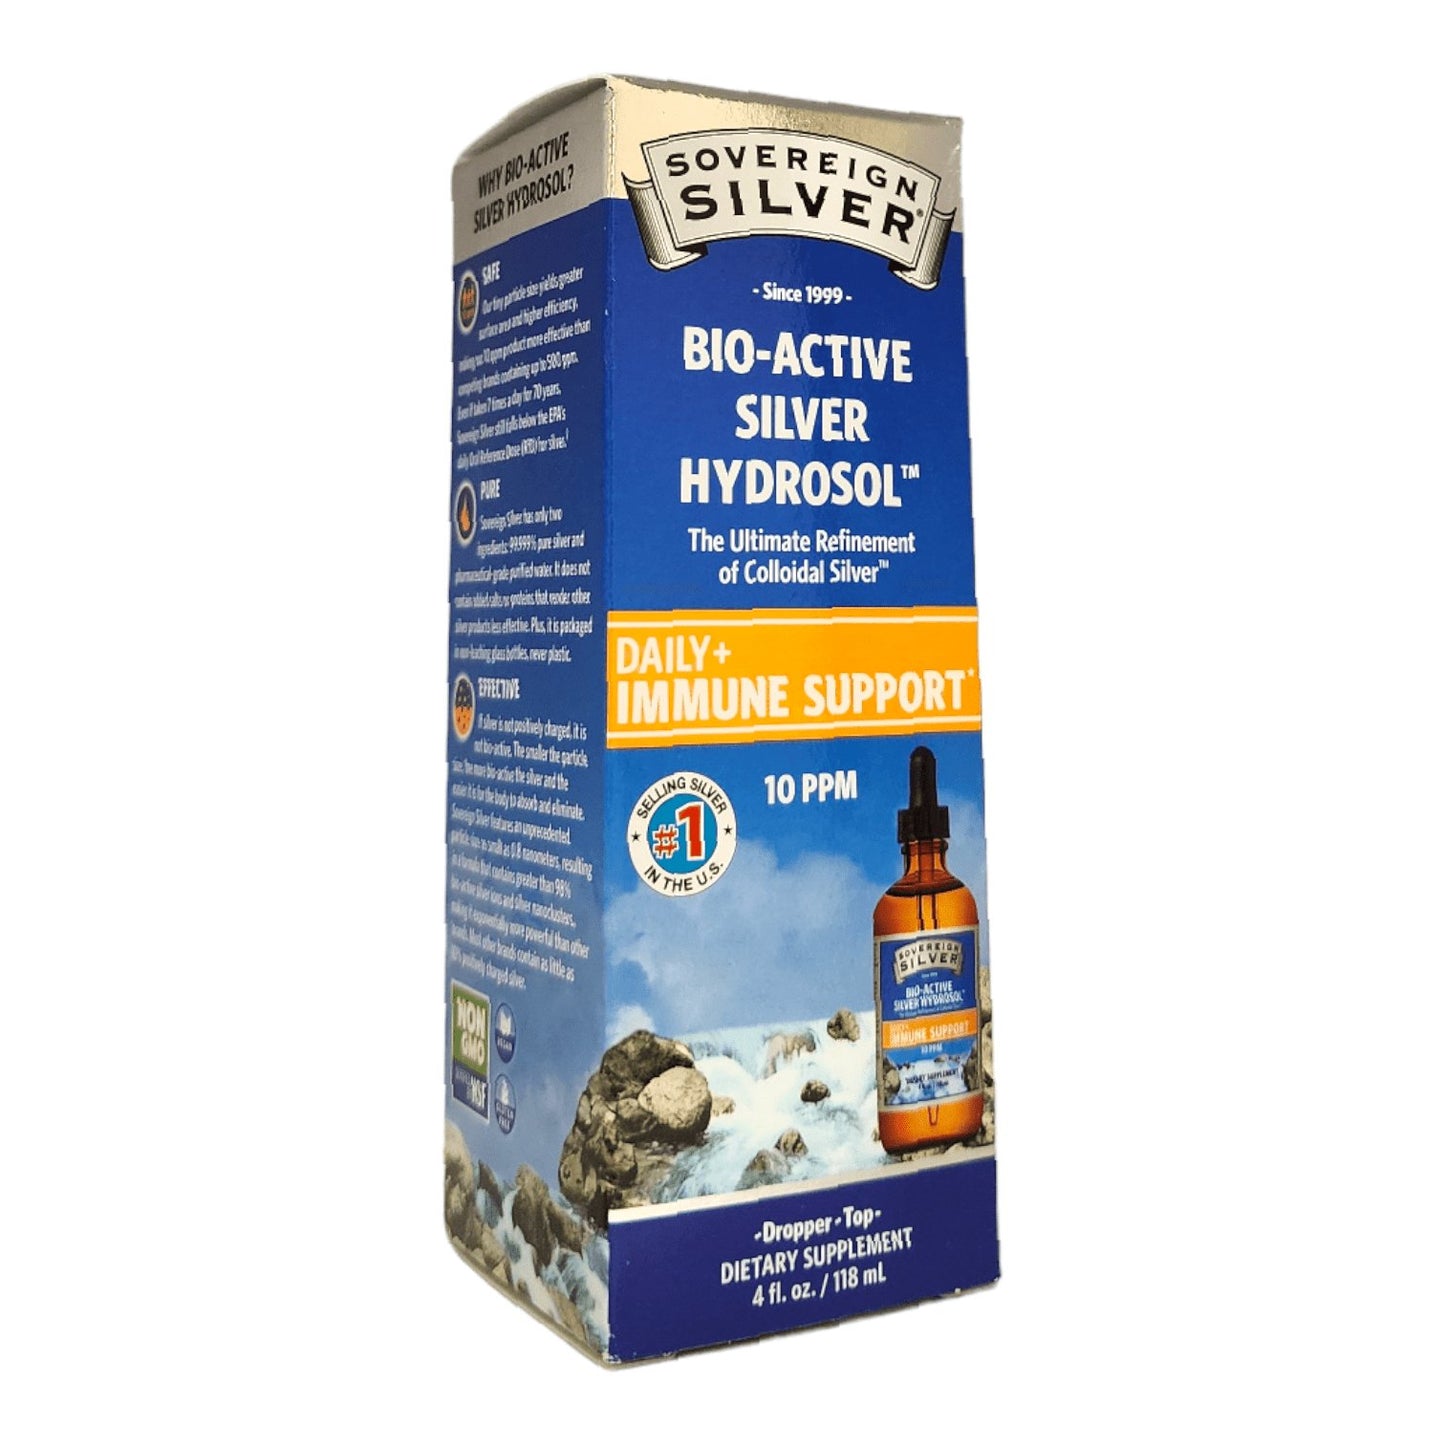 SOVEREIGN SILVER - BIO/ACTIVE SILVER HYDROSOL FOR IMMUNE SUPPORT - The Vault